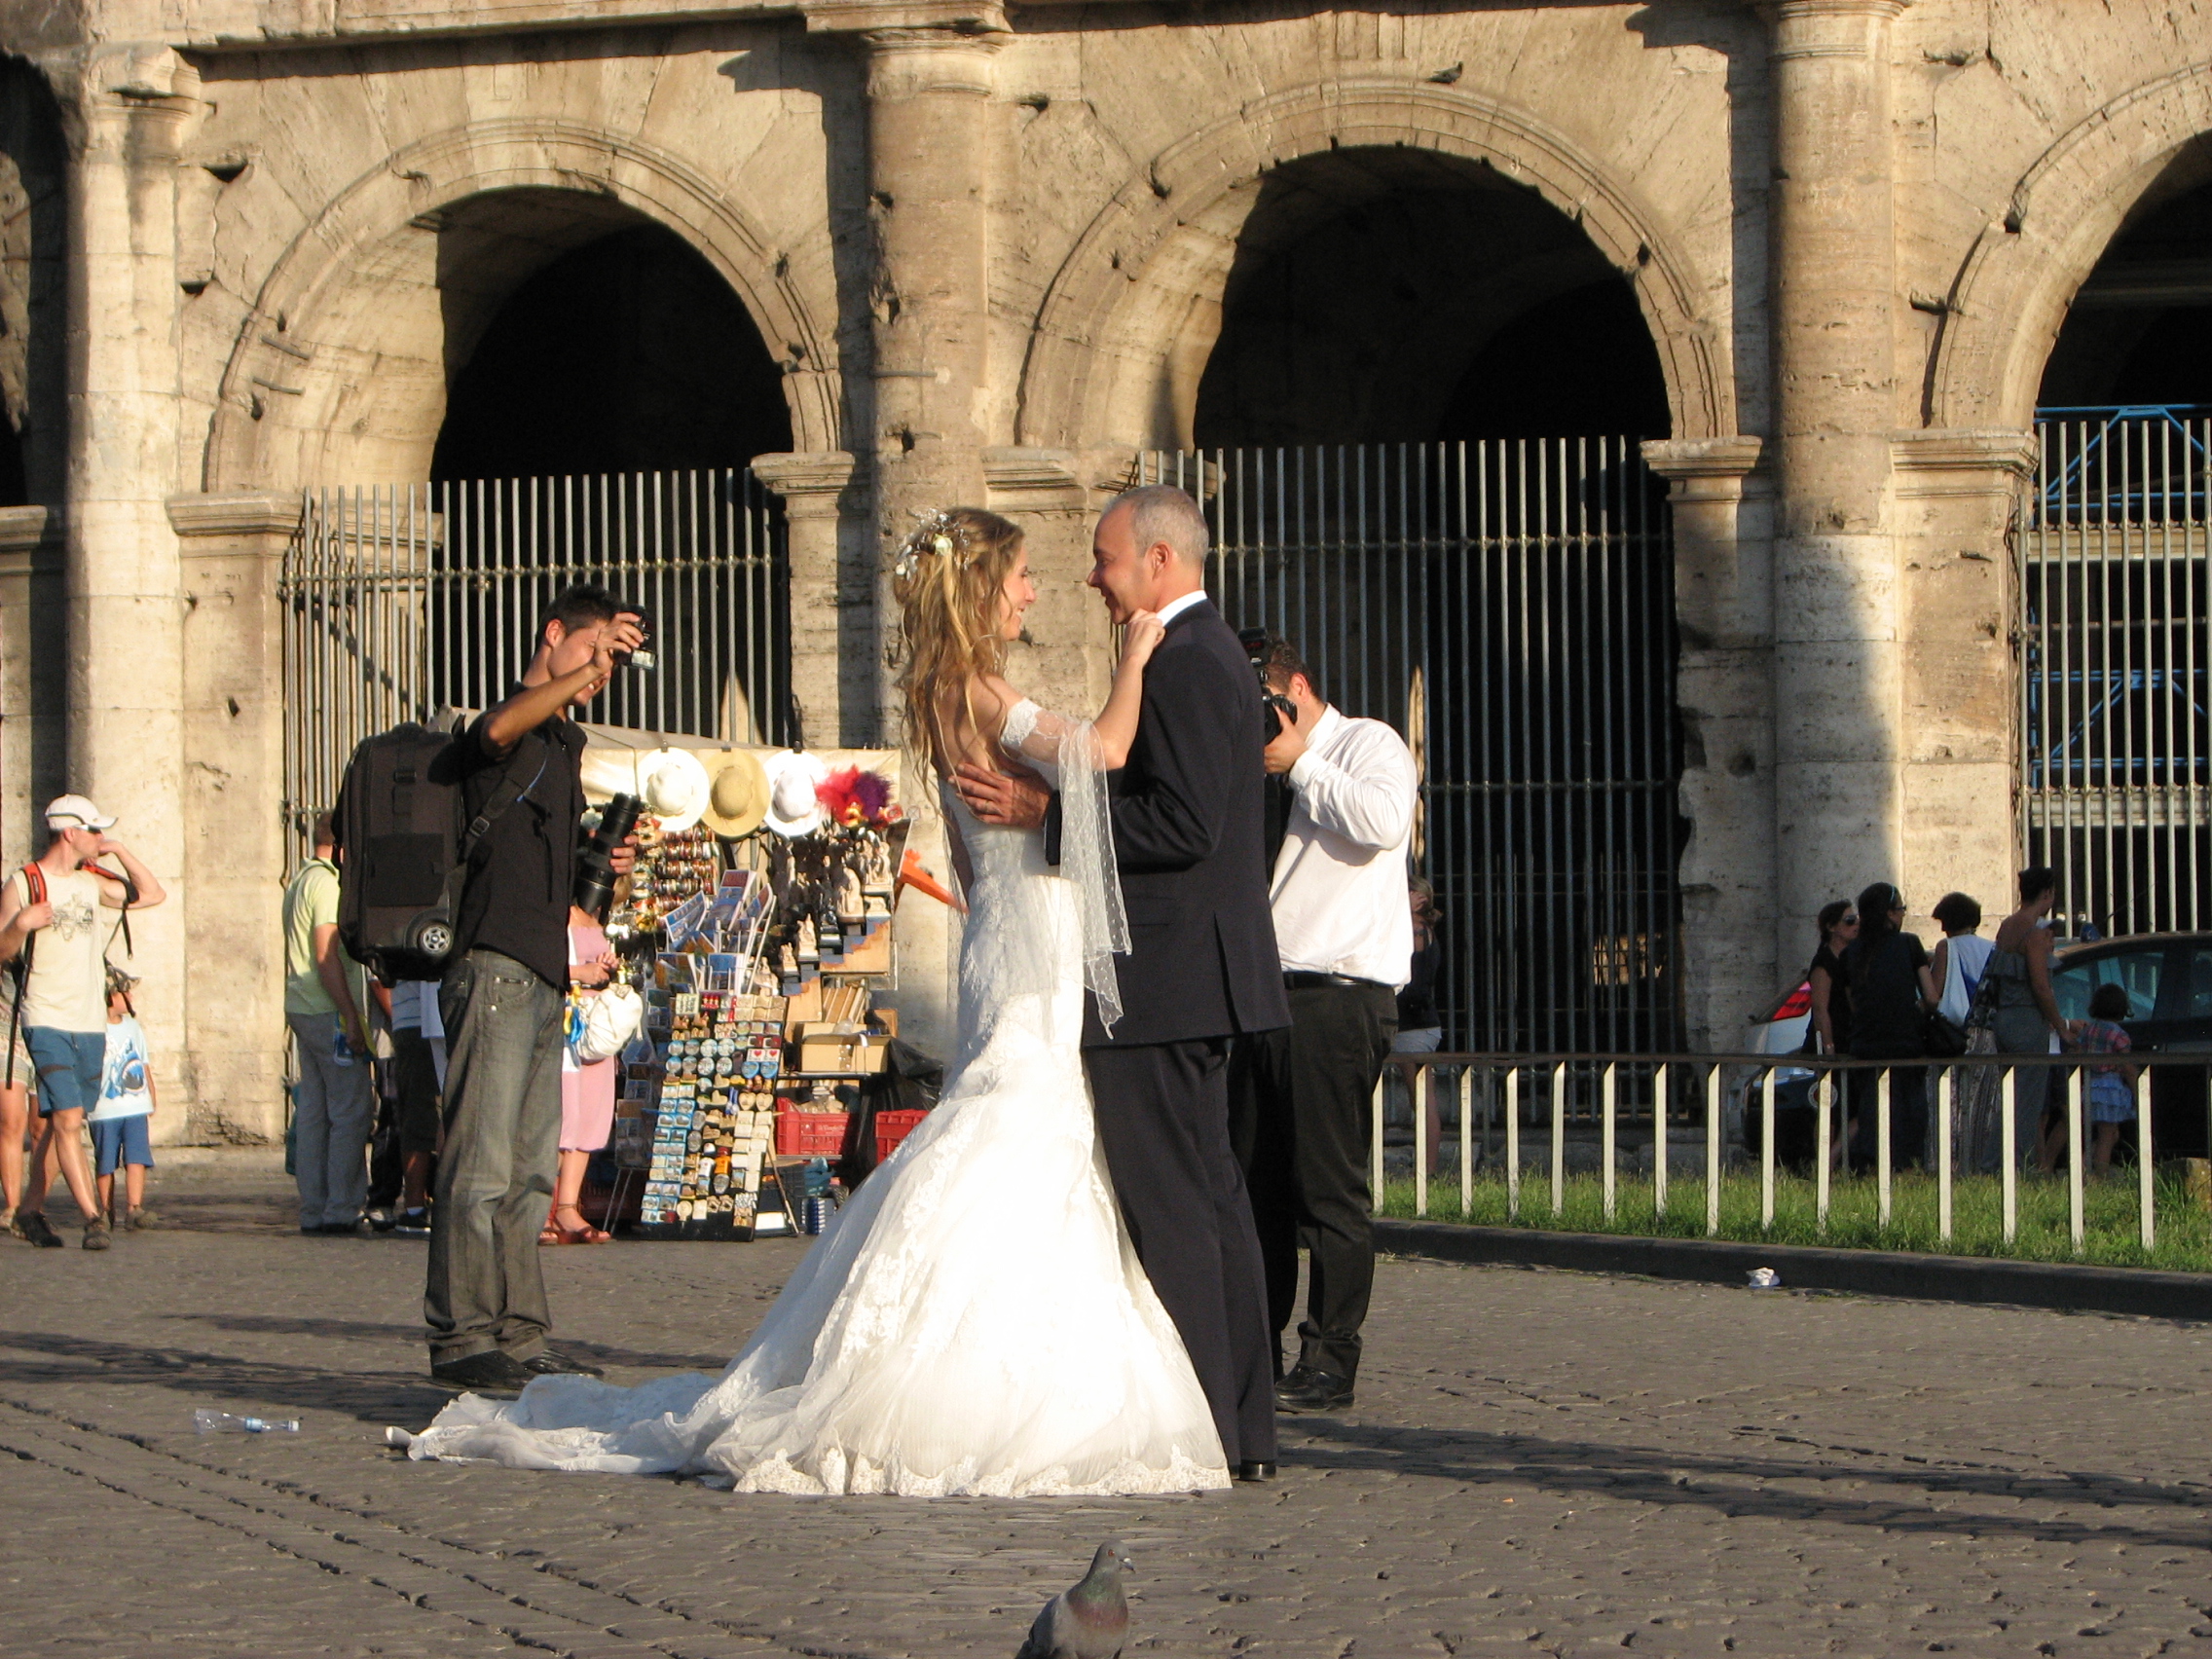 Newlyweds in Rome, Italy, European Union, August 2011, picture 31.